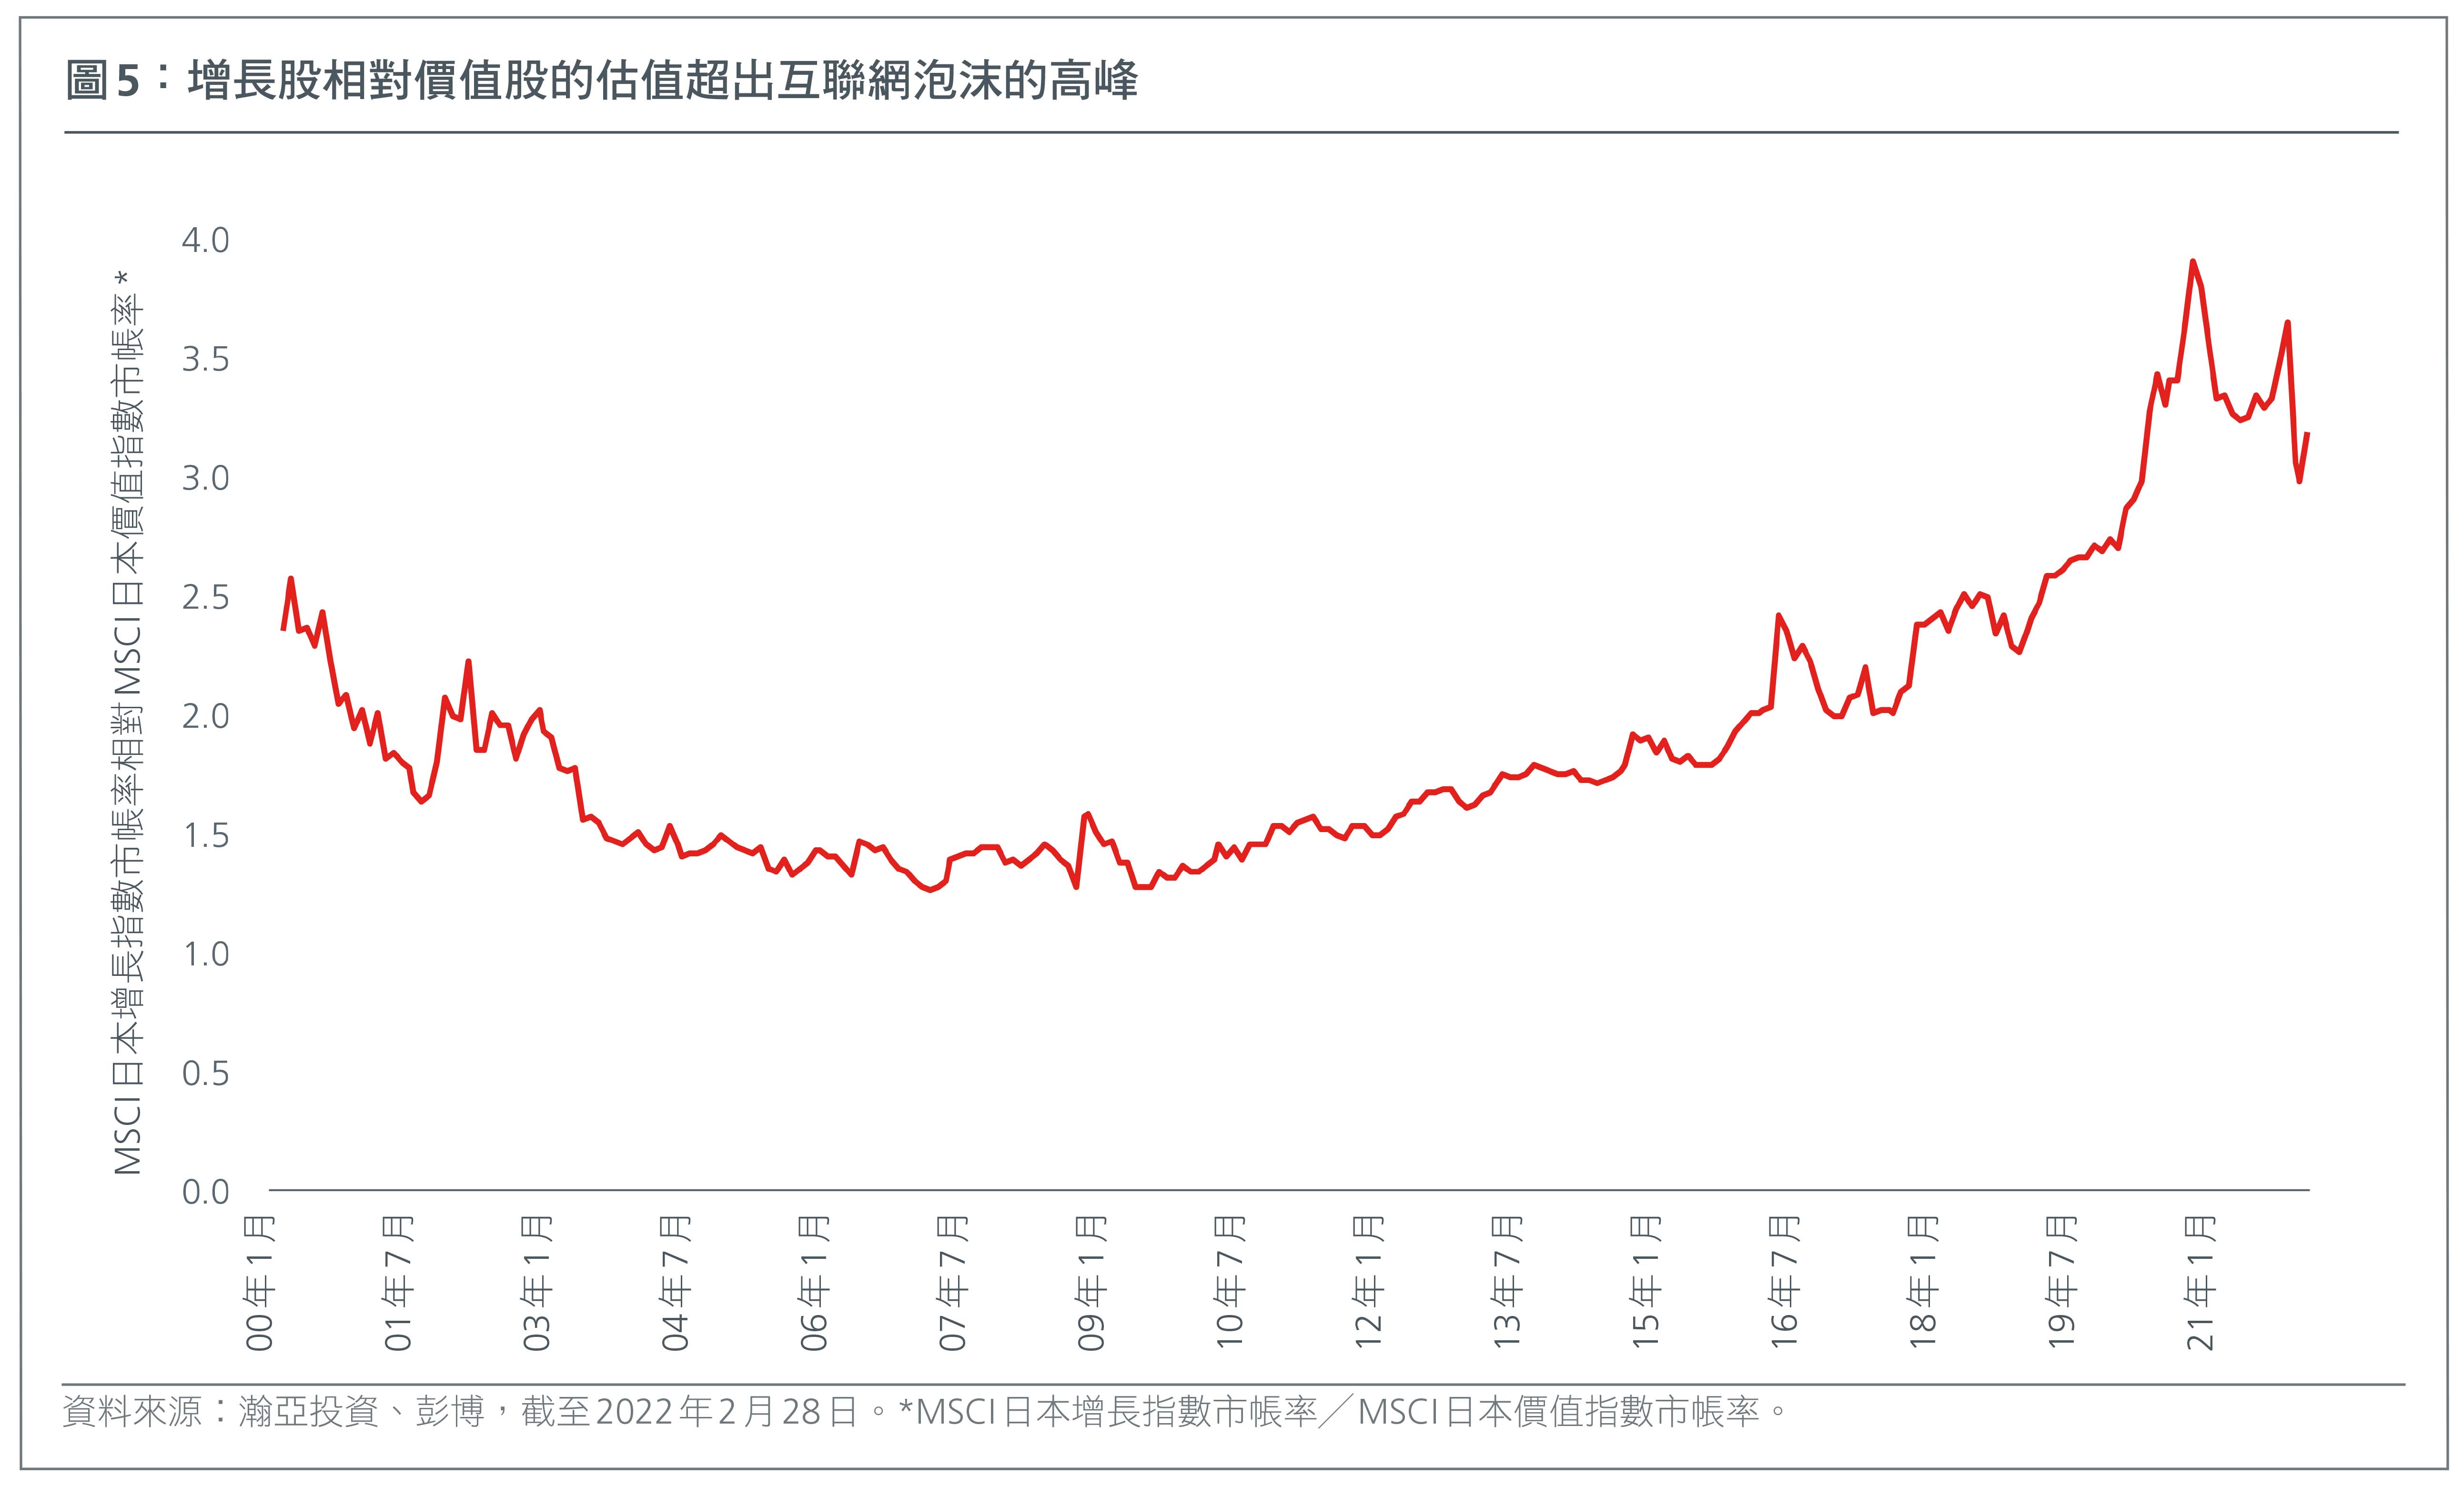 HK-CN-value-investing-in-asia-japan-is-well-positioned-for-long-term-outperformance-FIG-5